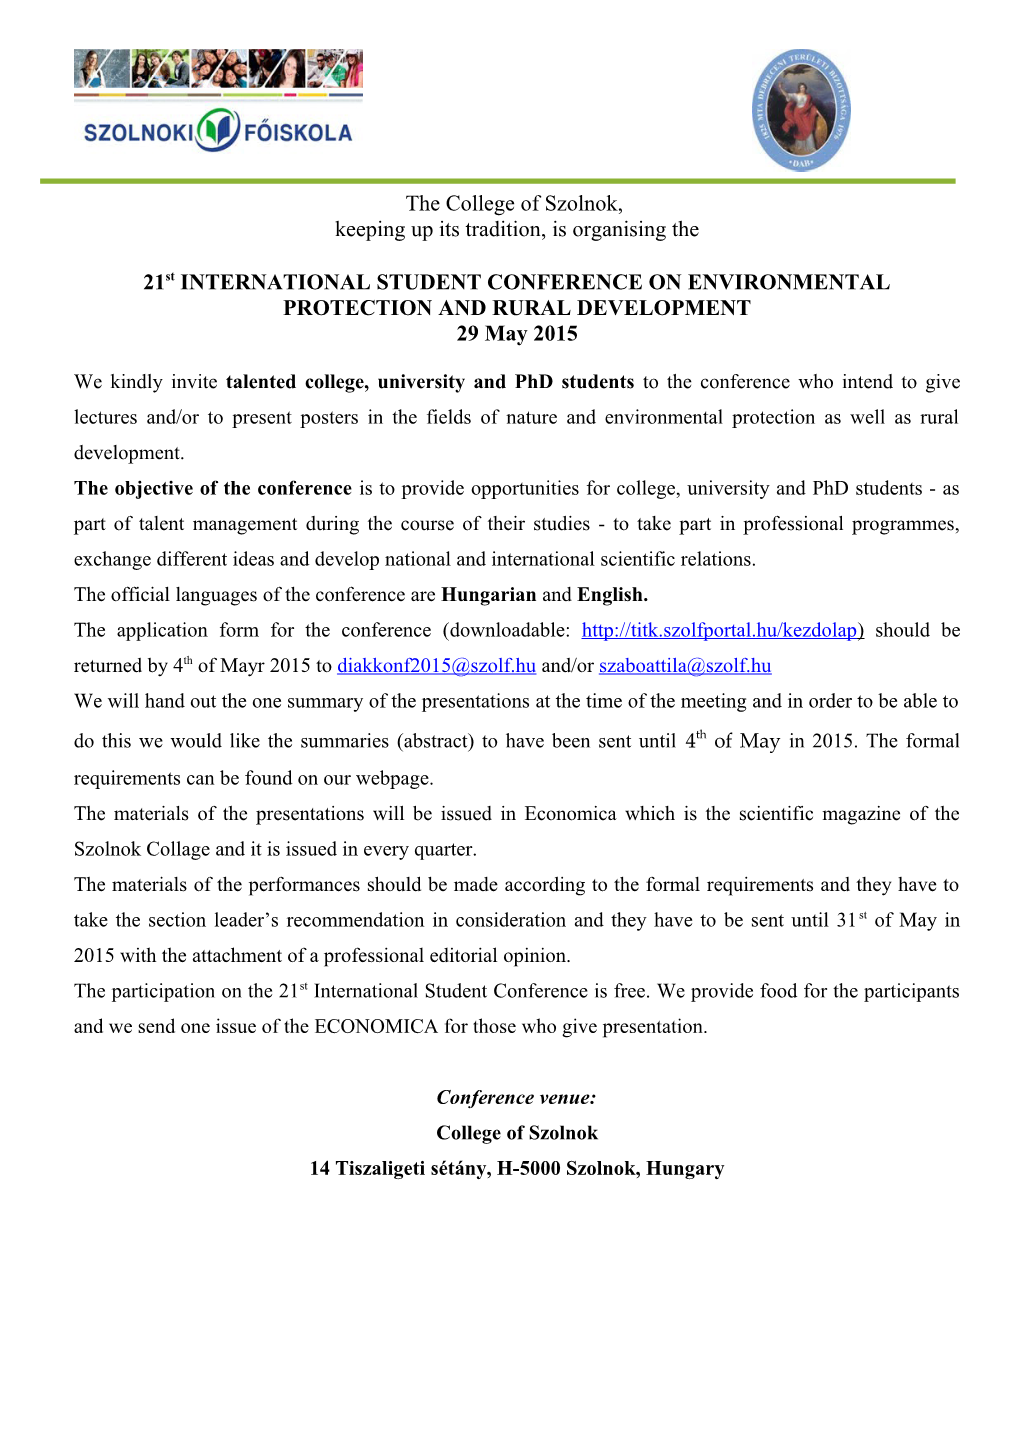 21St International Student Conference on Environmental Protection and RURAL DEVELOPMENT